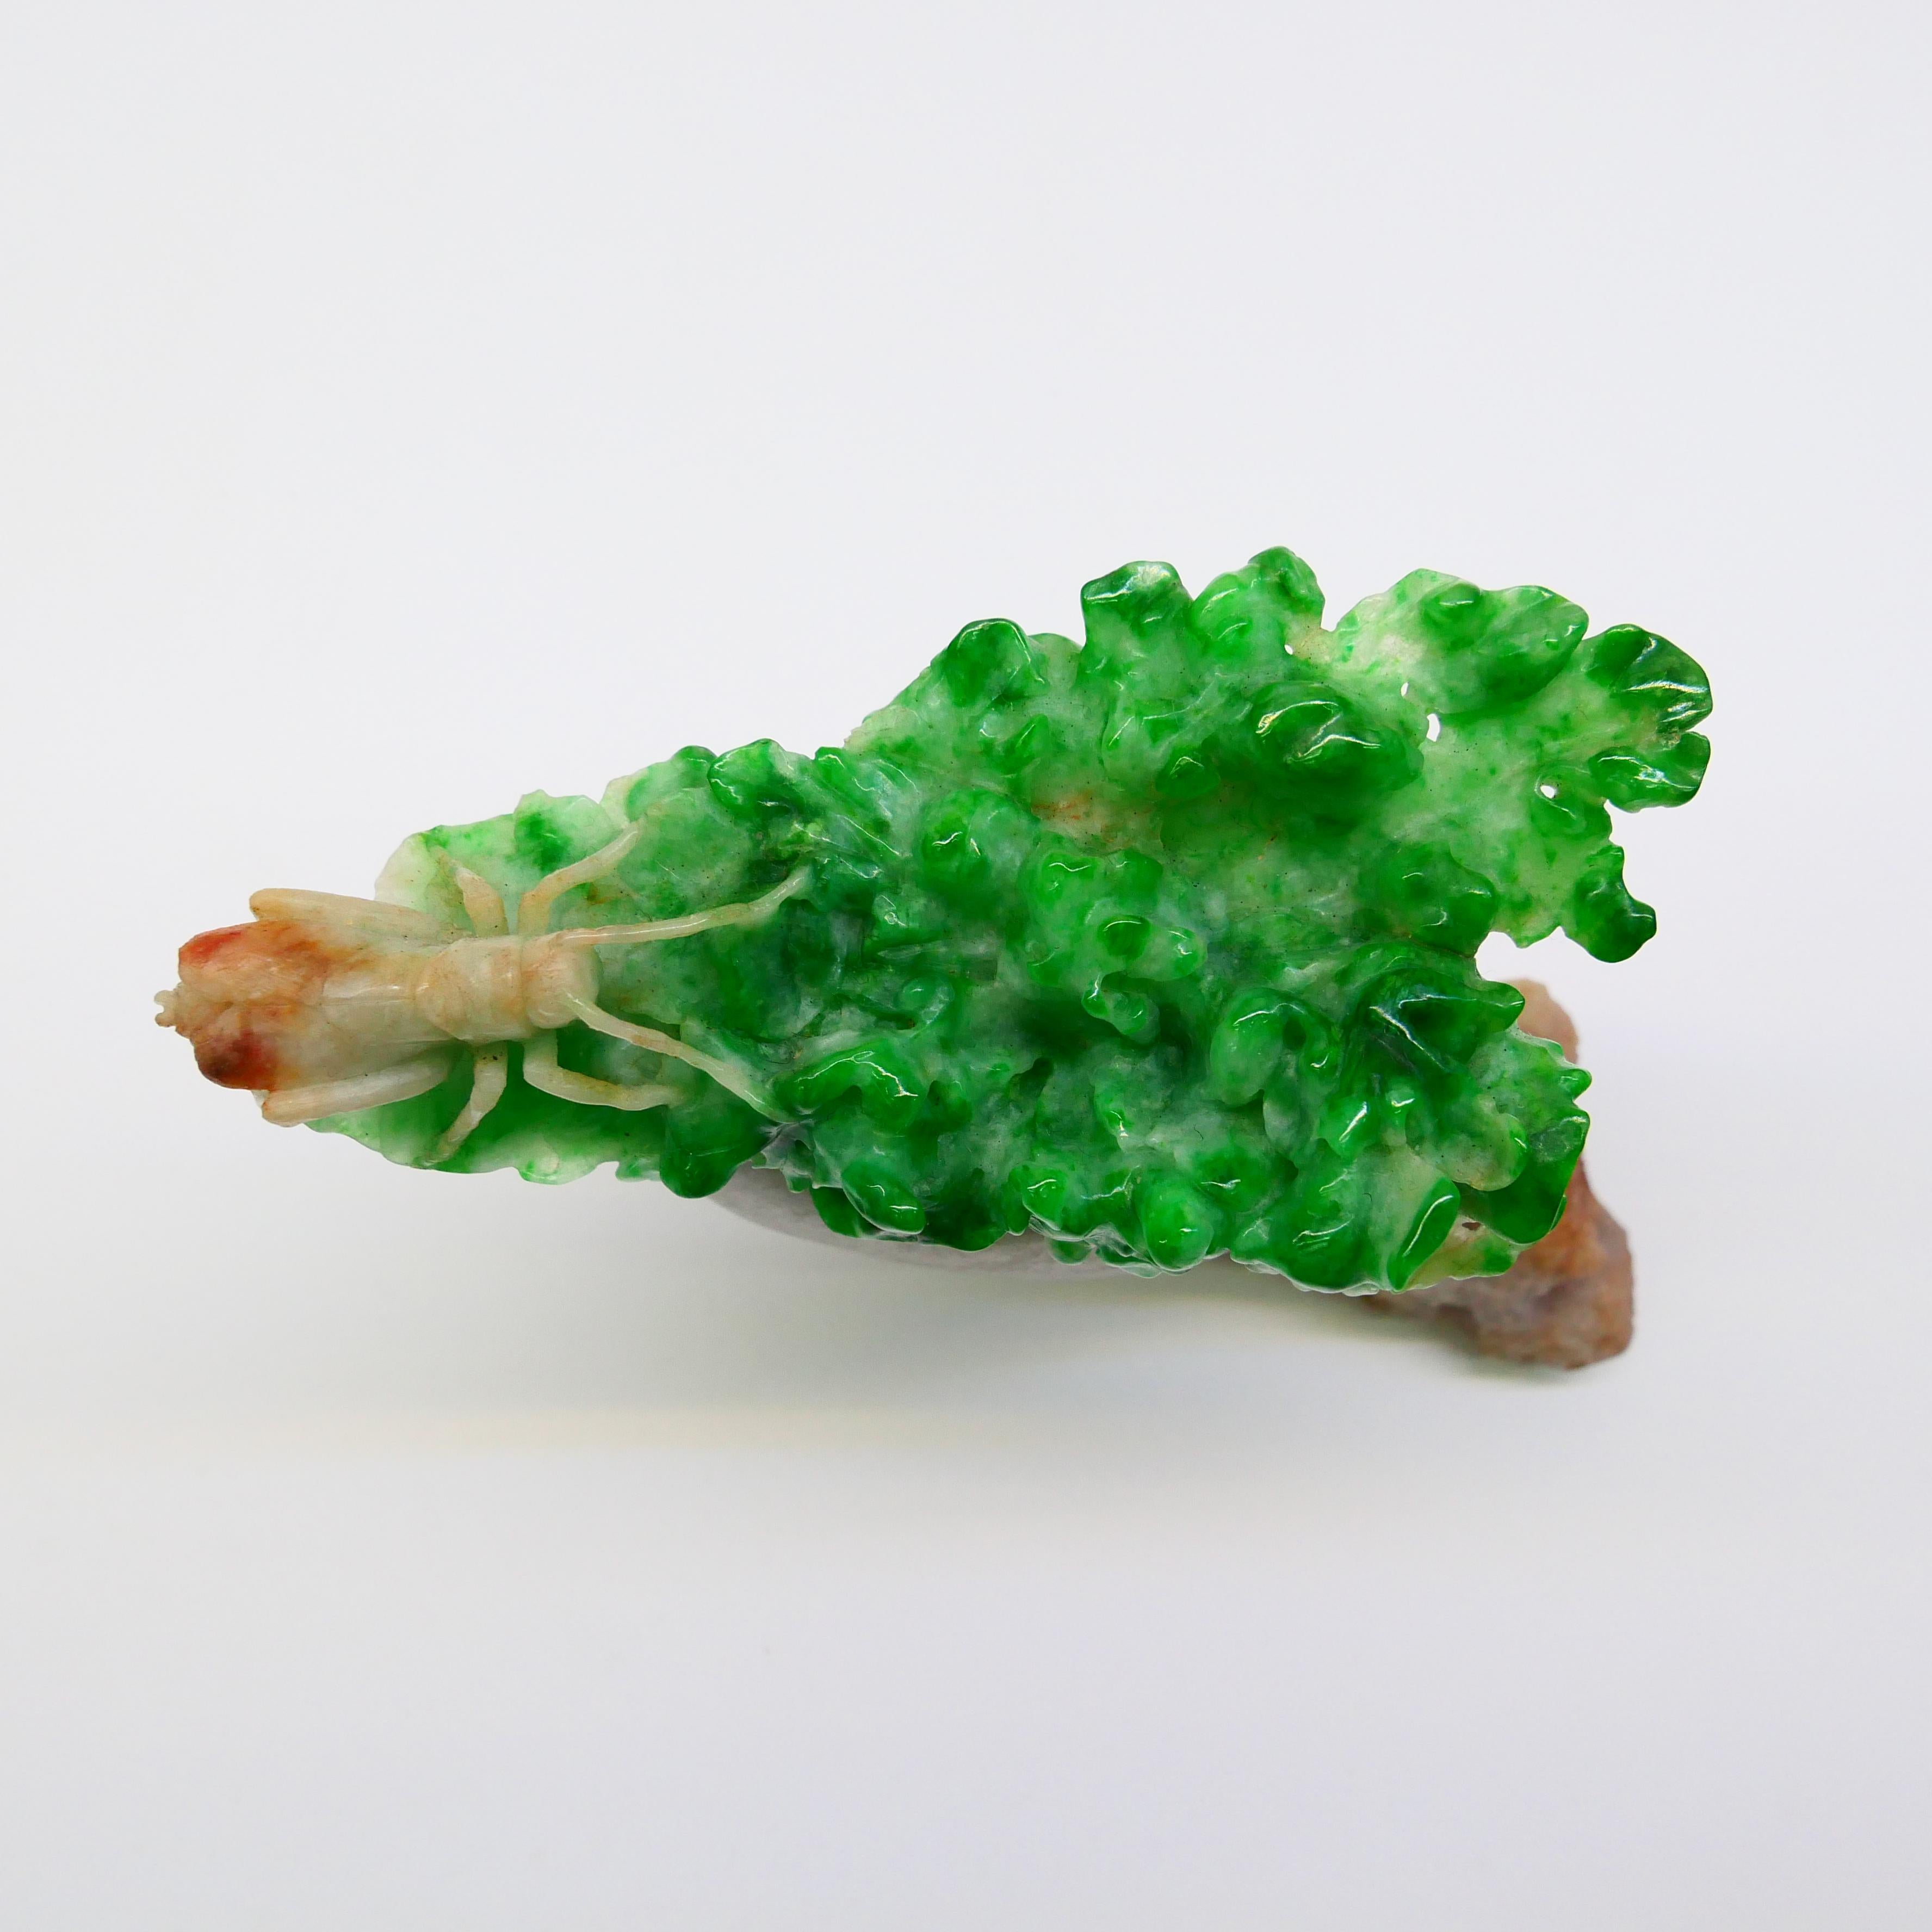 Contemporary Important Jadeite Jade Decoration, Titled Survival of the Fittest, circa 1930 For Sale